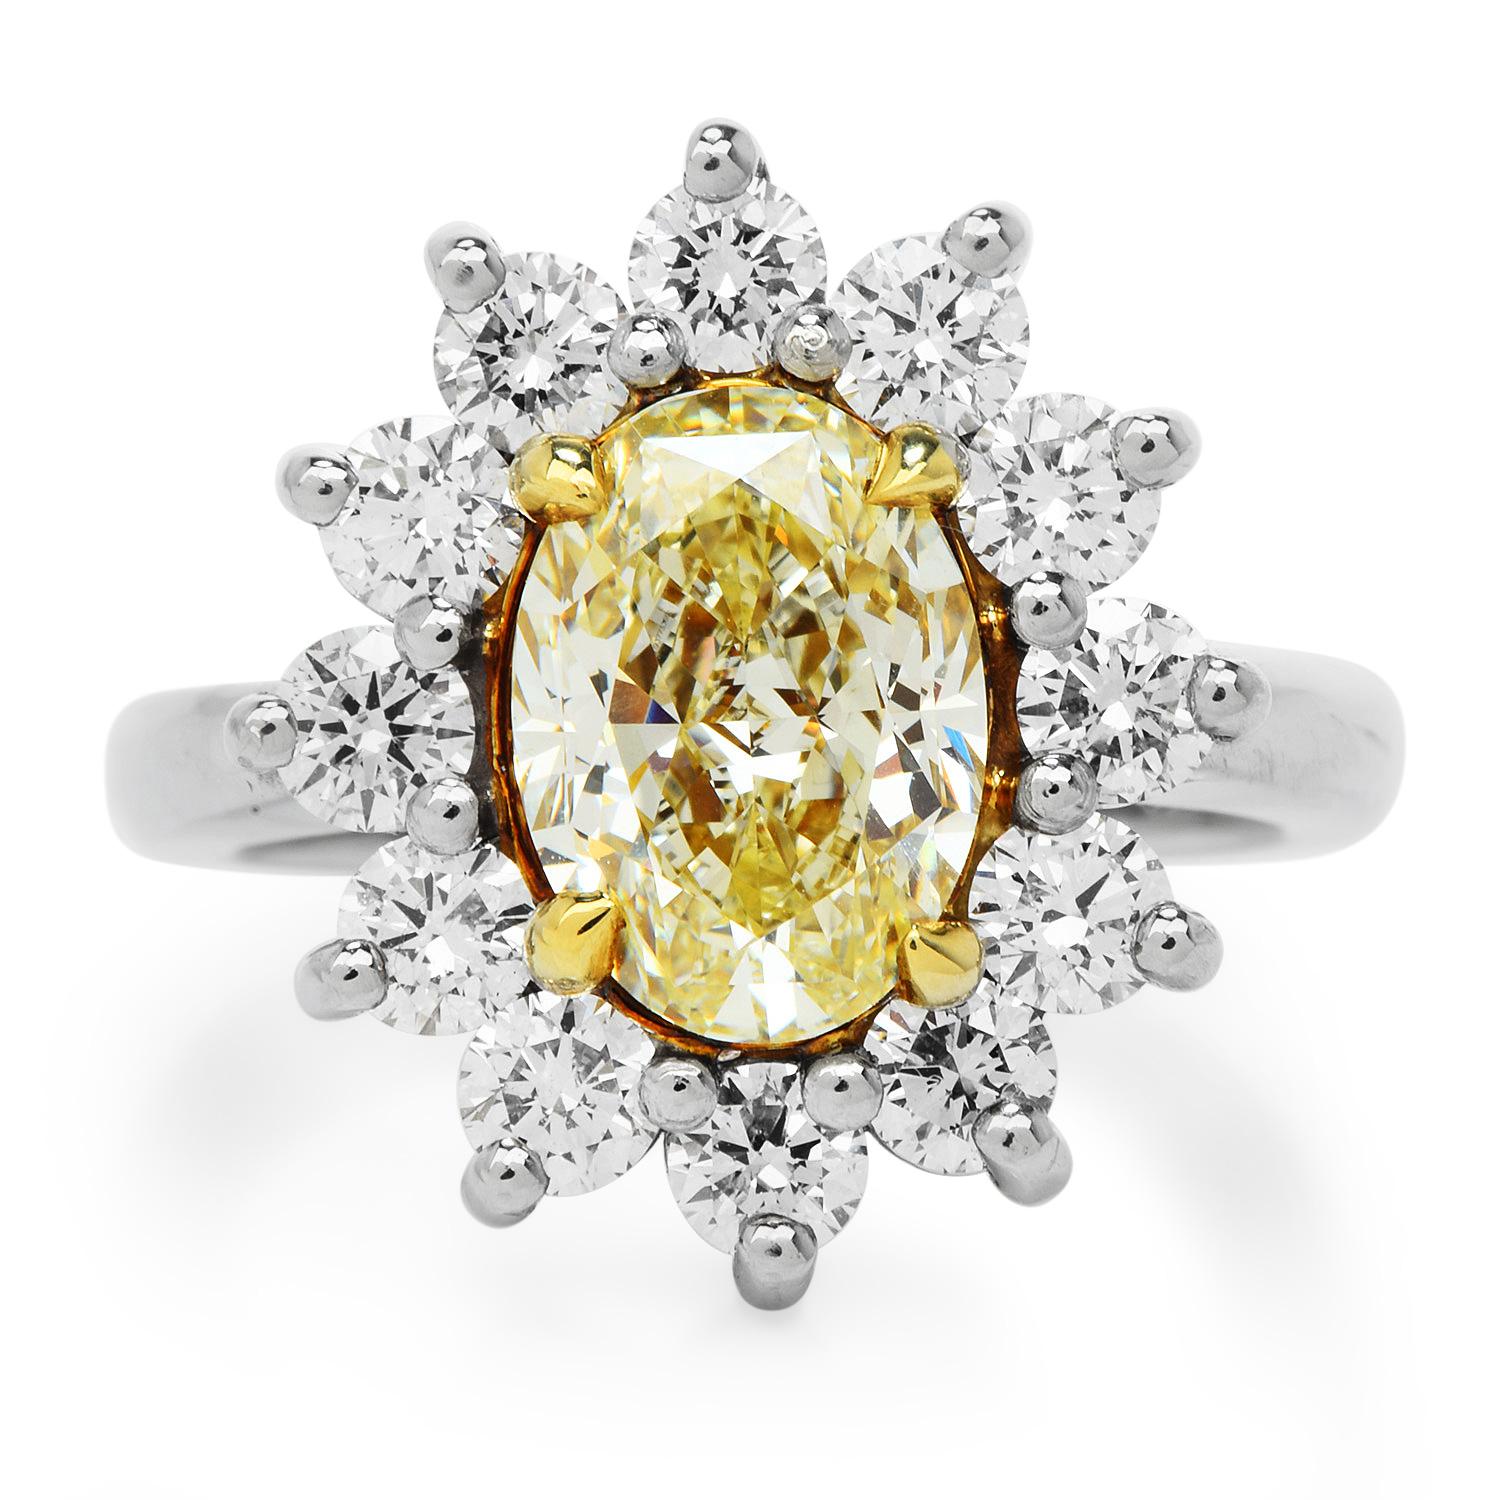 Feel the sunshine every day and every night on your finger, 

This alluring ring was crafted in Luxurious Platinum and accented by 18K yellow gold prongs.

Prominently features in the center a GIA-certified Natural Fancy Light Yellow Diamond, Oval